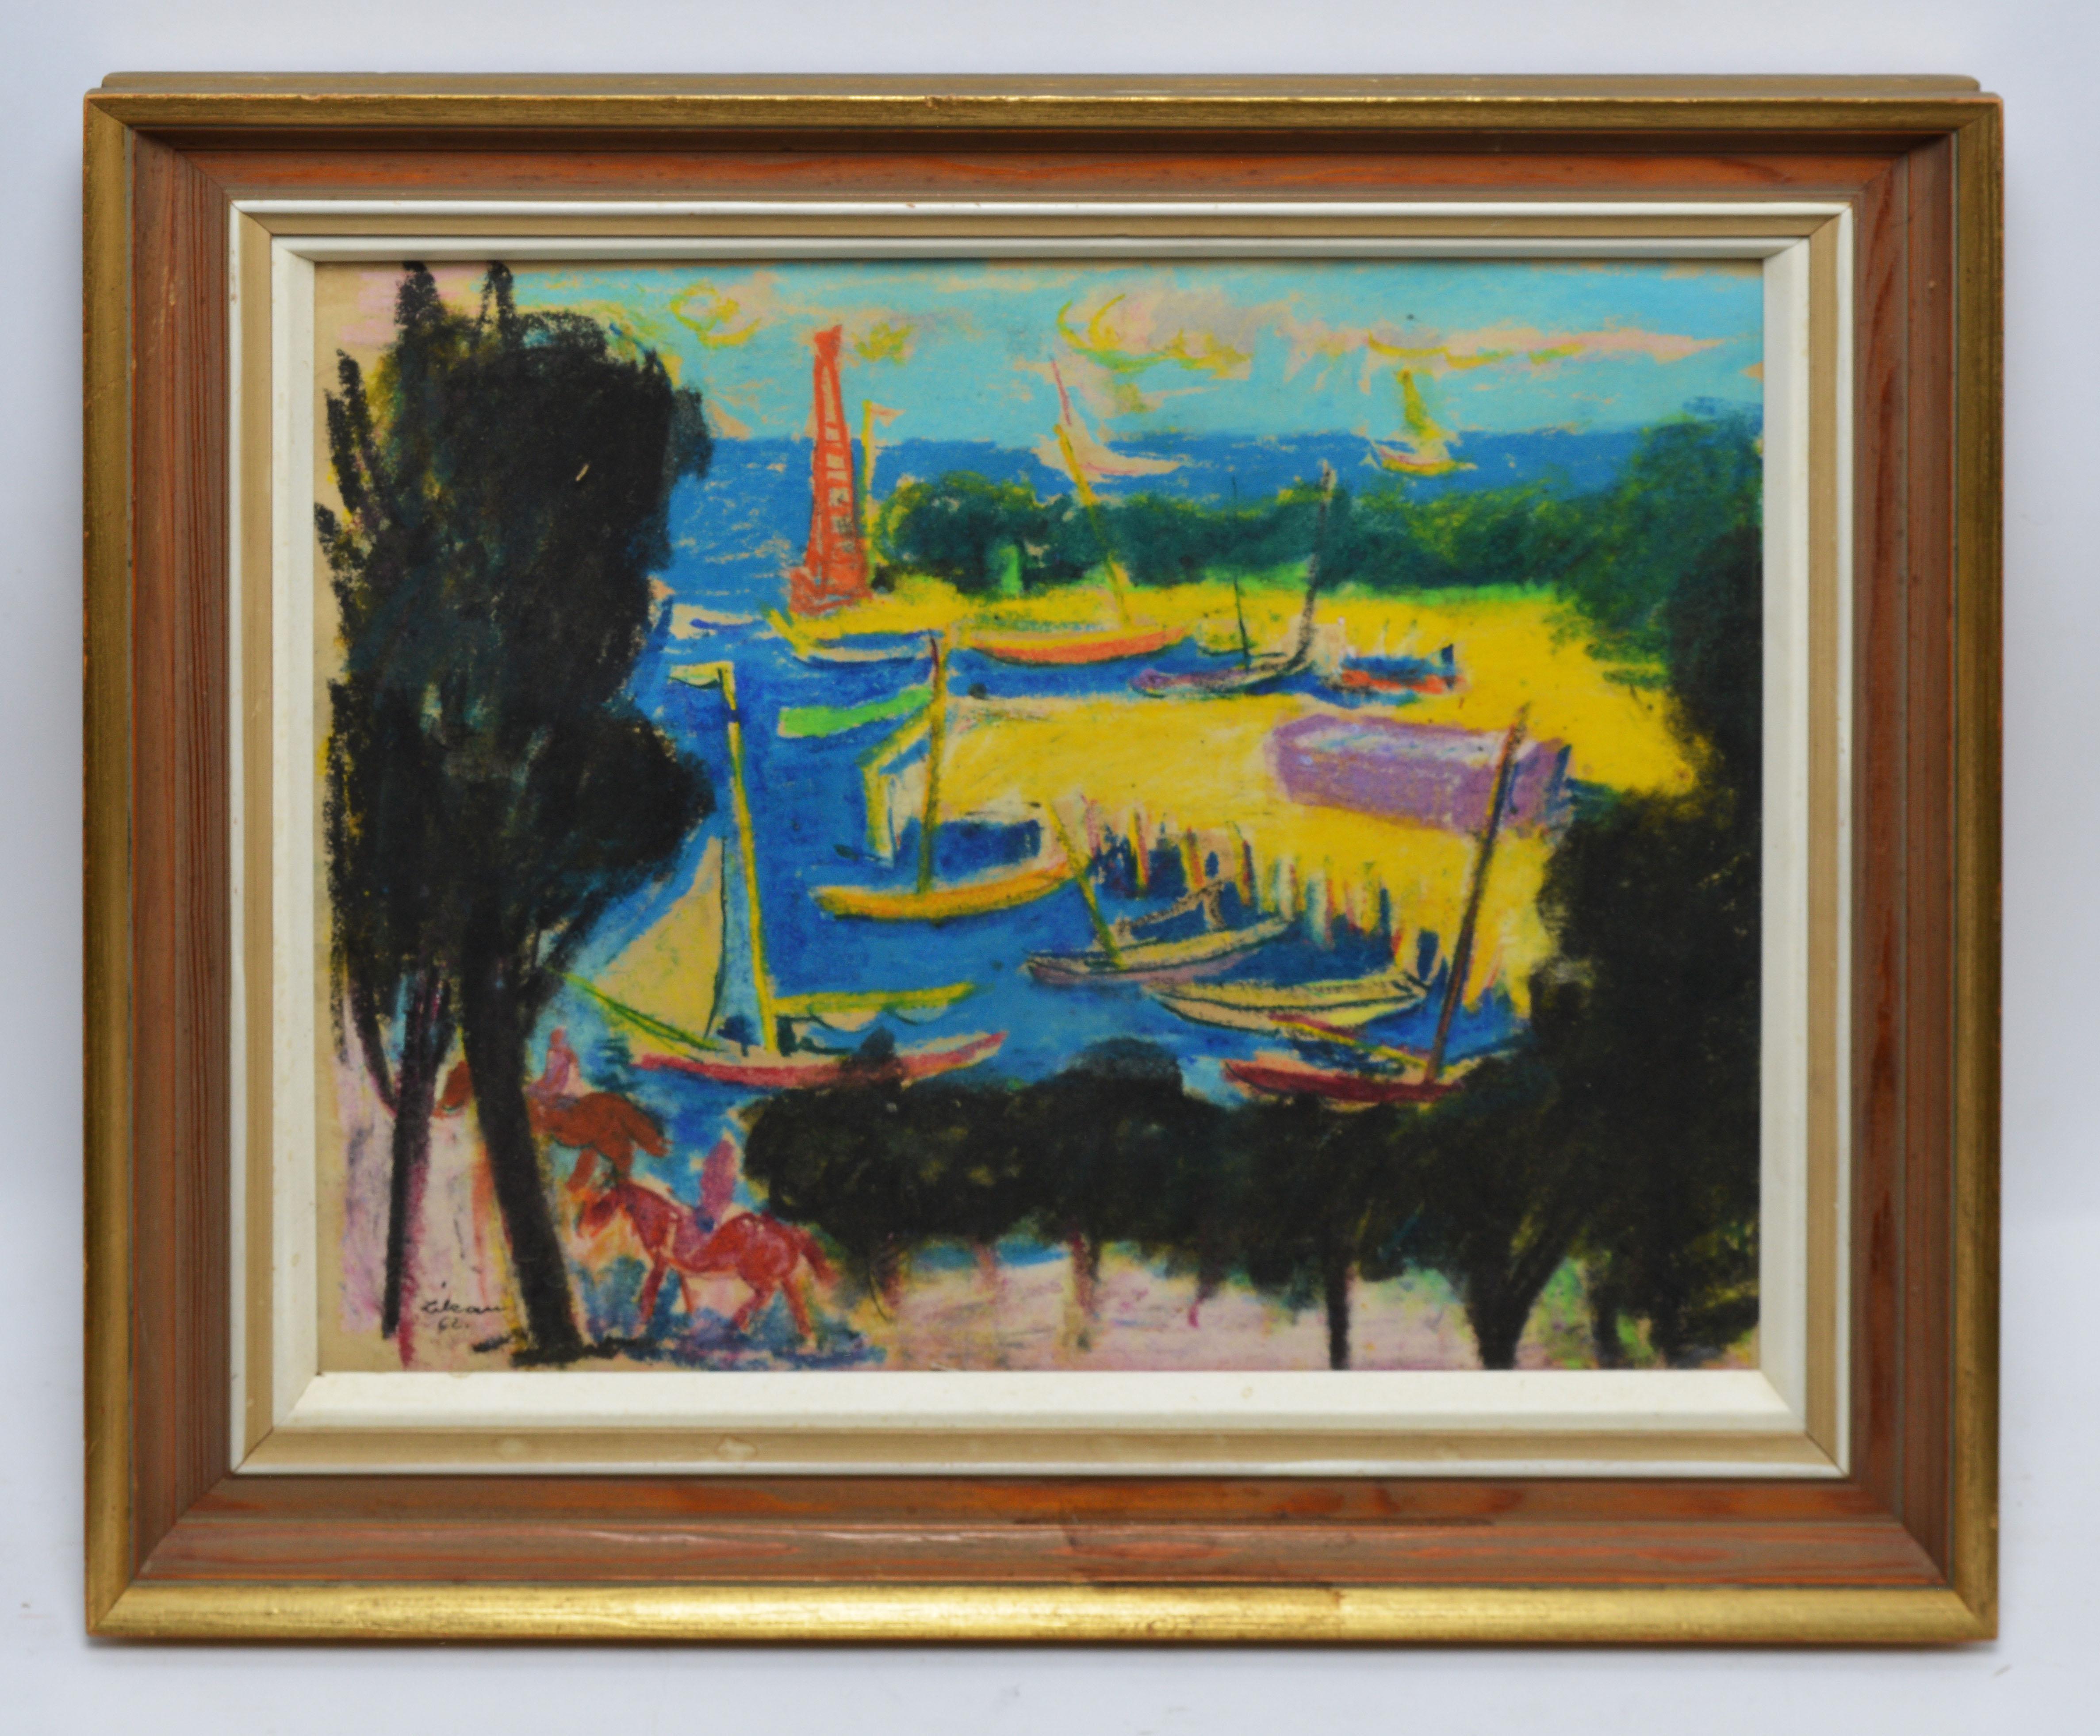 Vintage modernist tropical harbor view by Gustav Likan  (1912 - 1998).  Pastel on paper, circa 1962.  Signed.  Displayed in a giltwood frame.  Image, 16